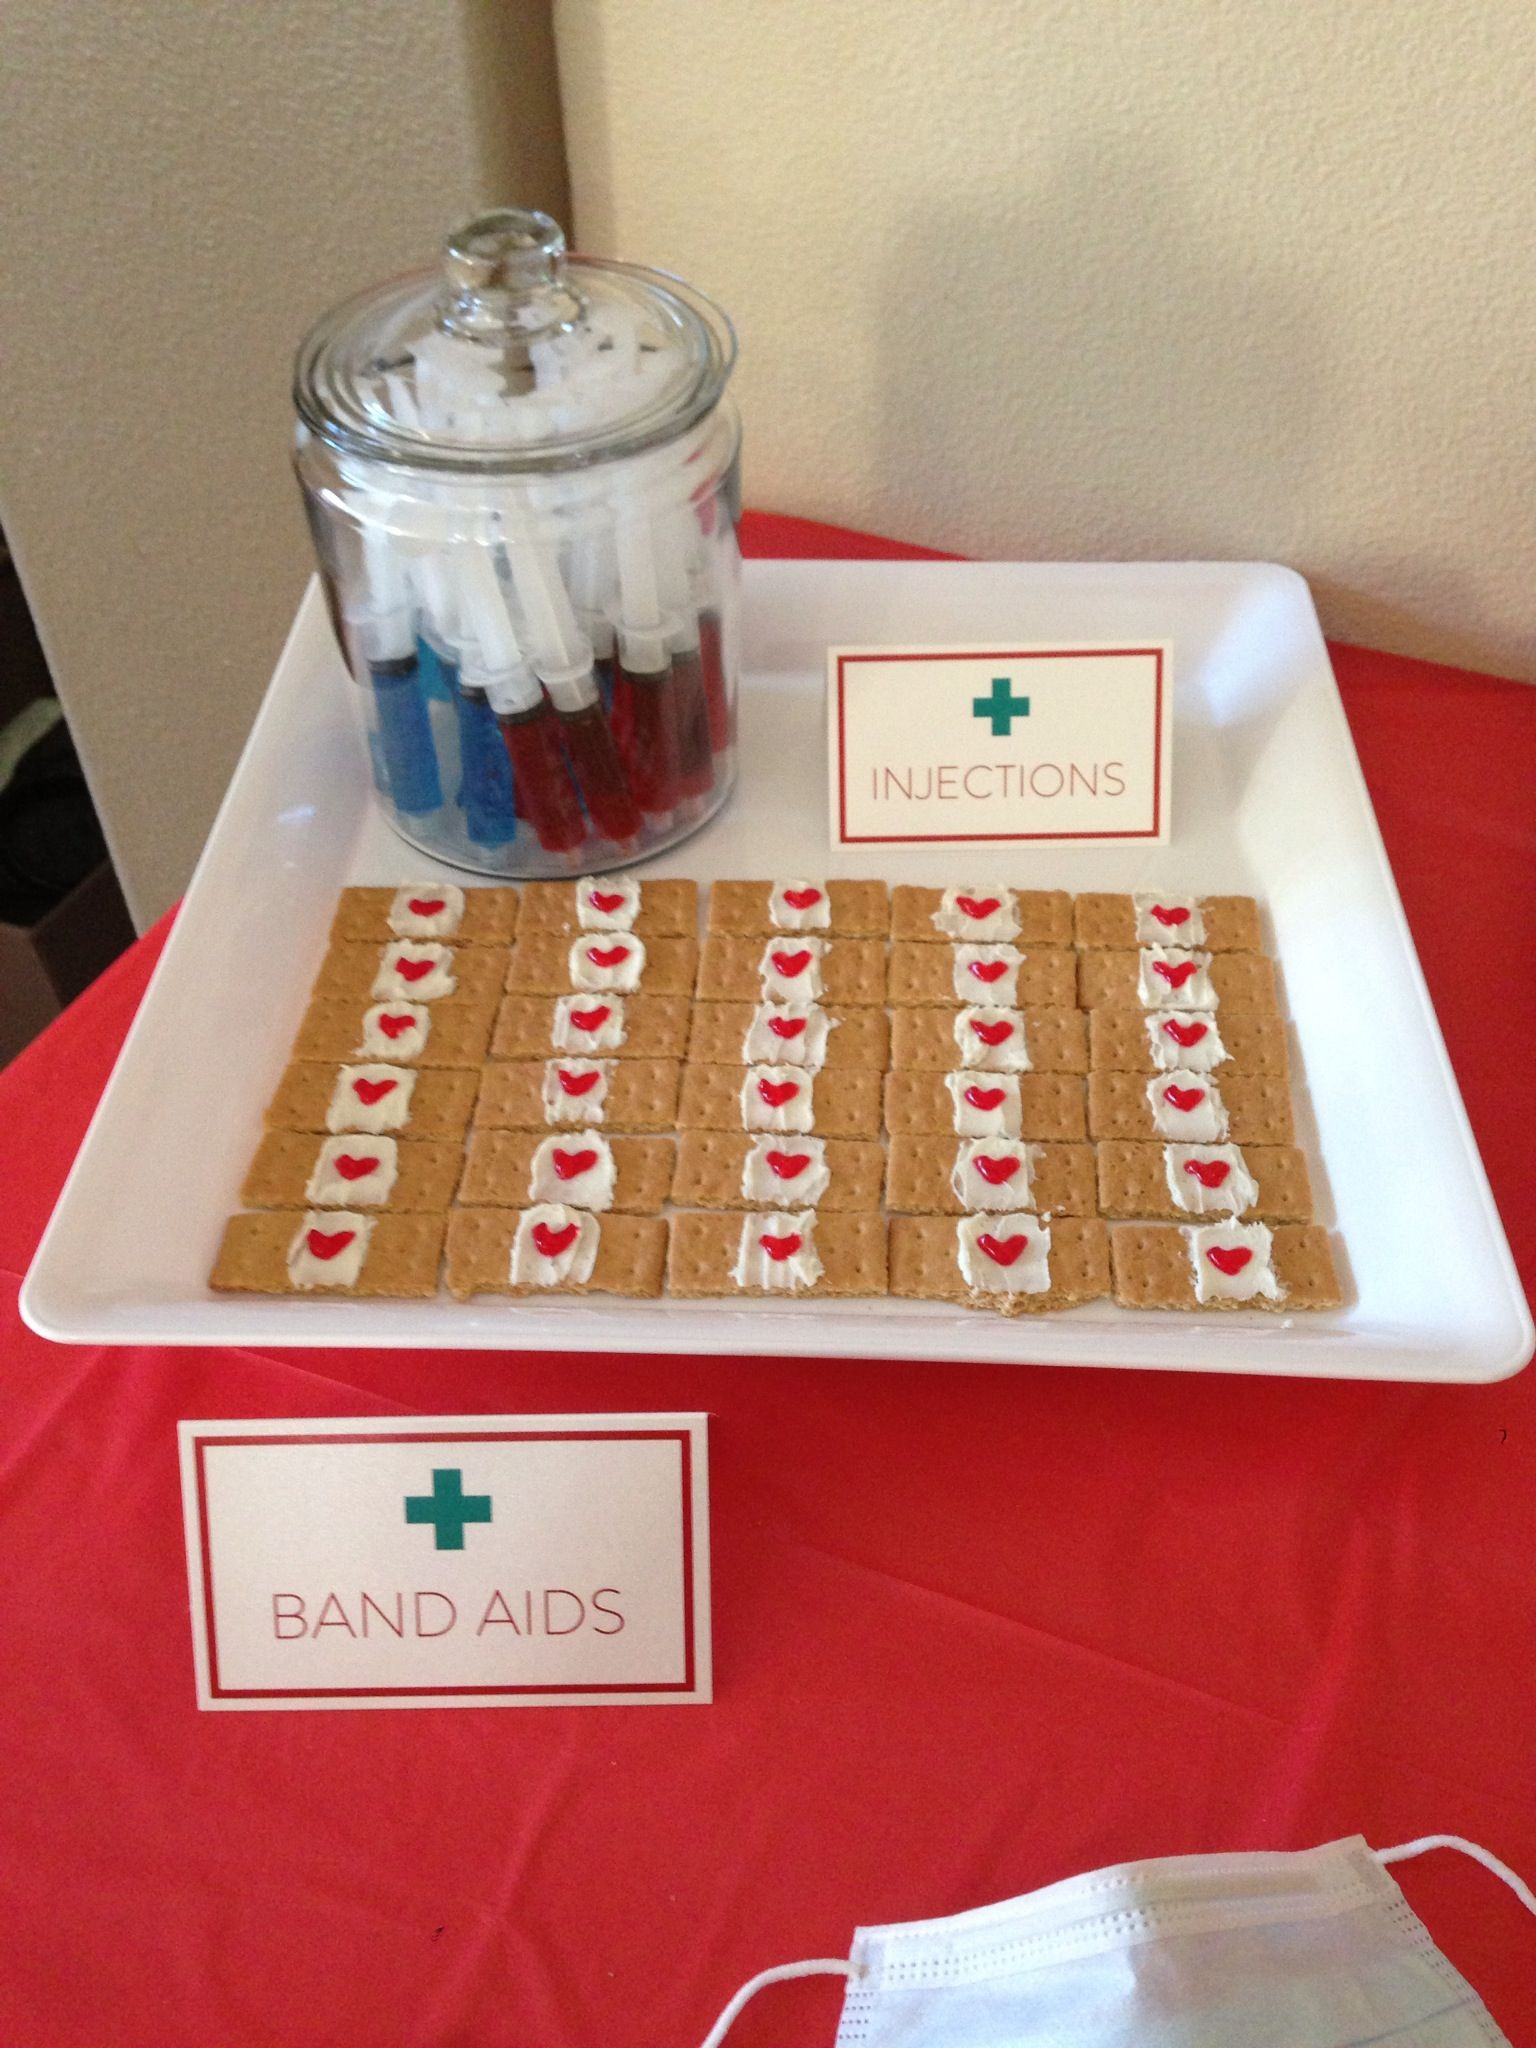 Medical School Graduation Party Ideas
 Jello "Injections" and Graham Cracker "Bandaids" at my